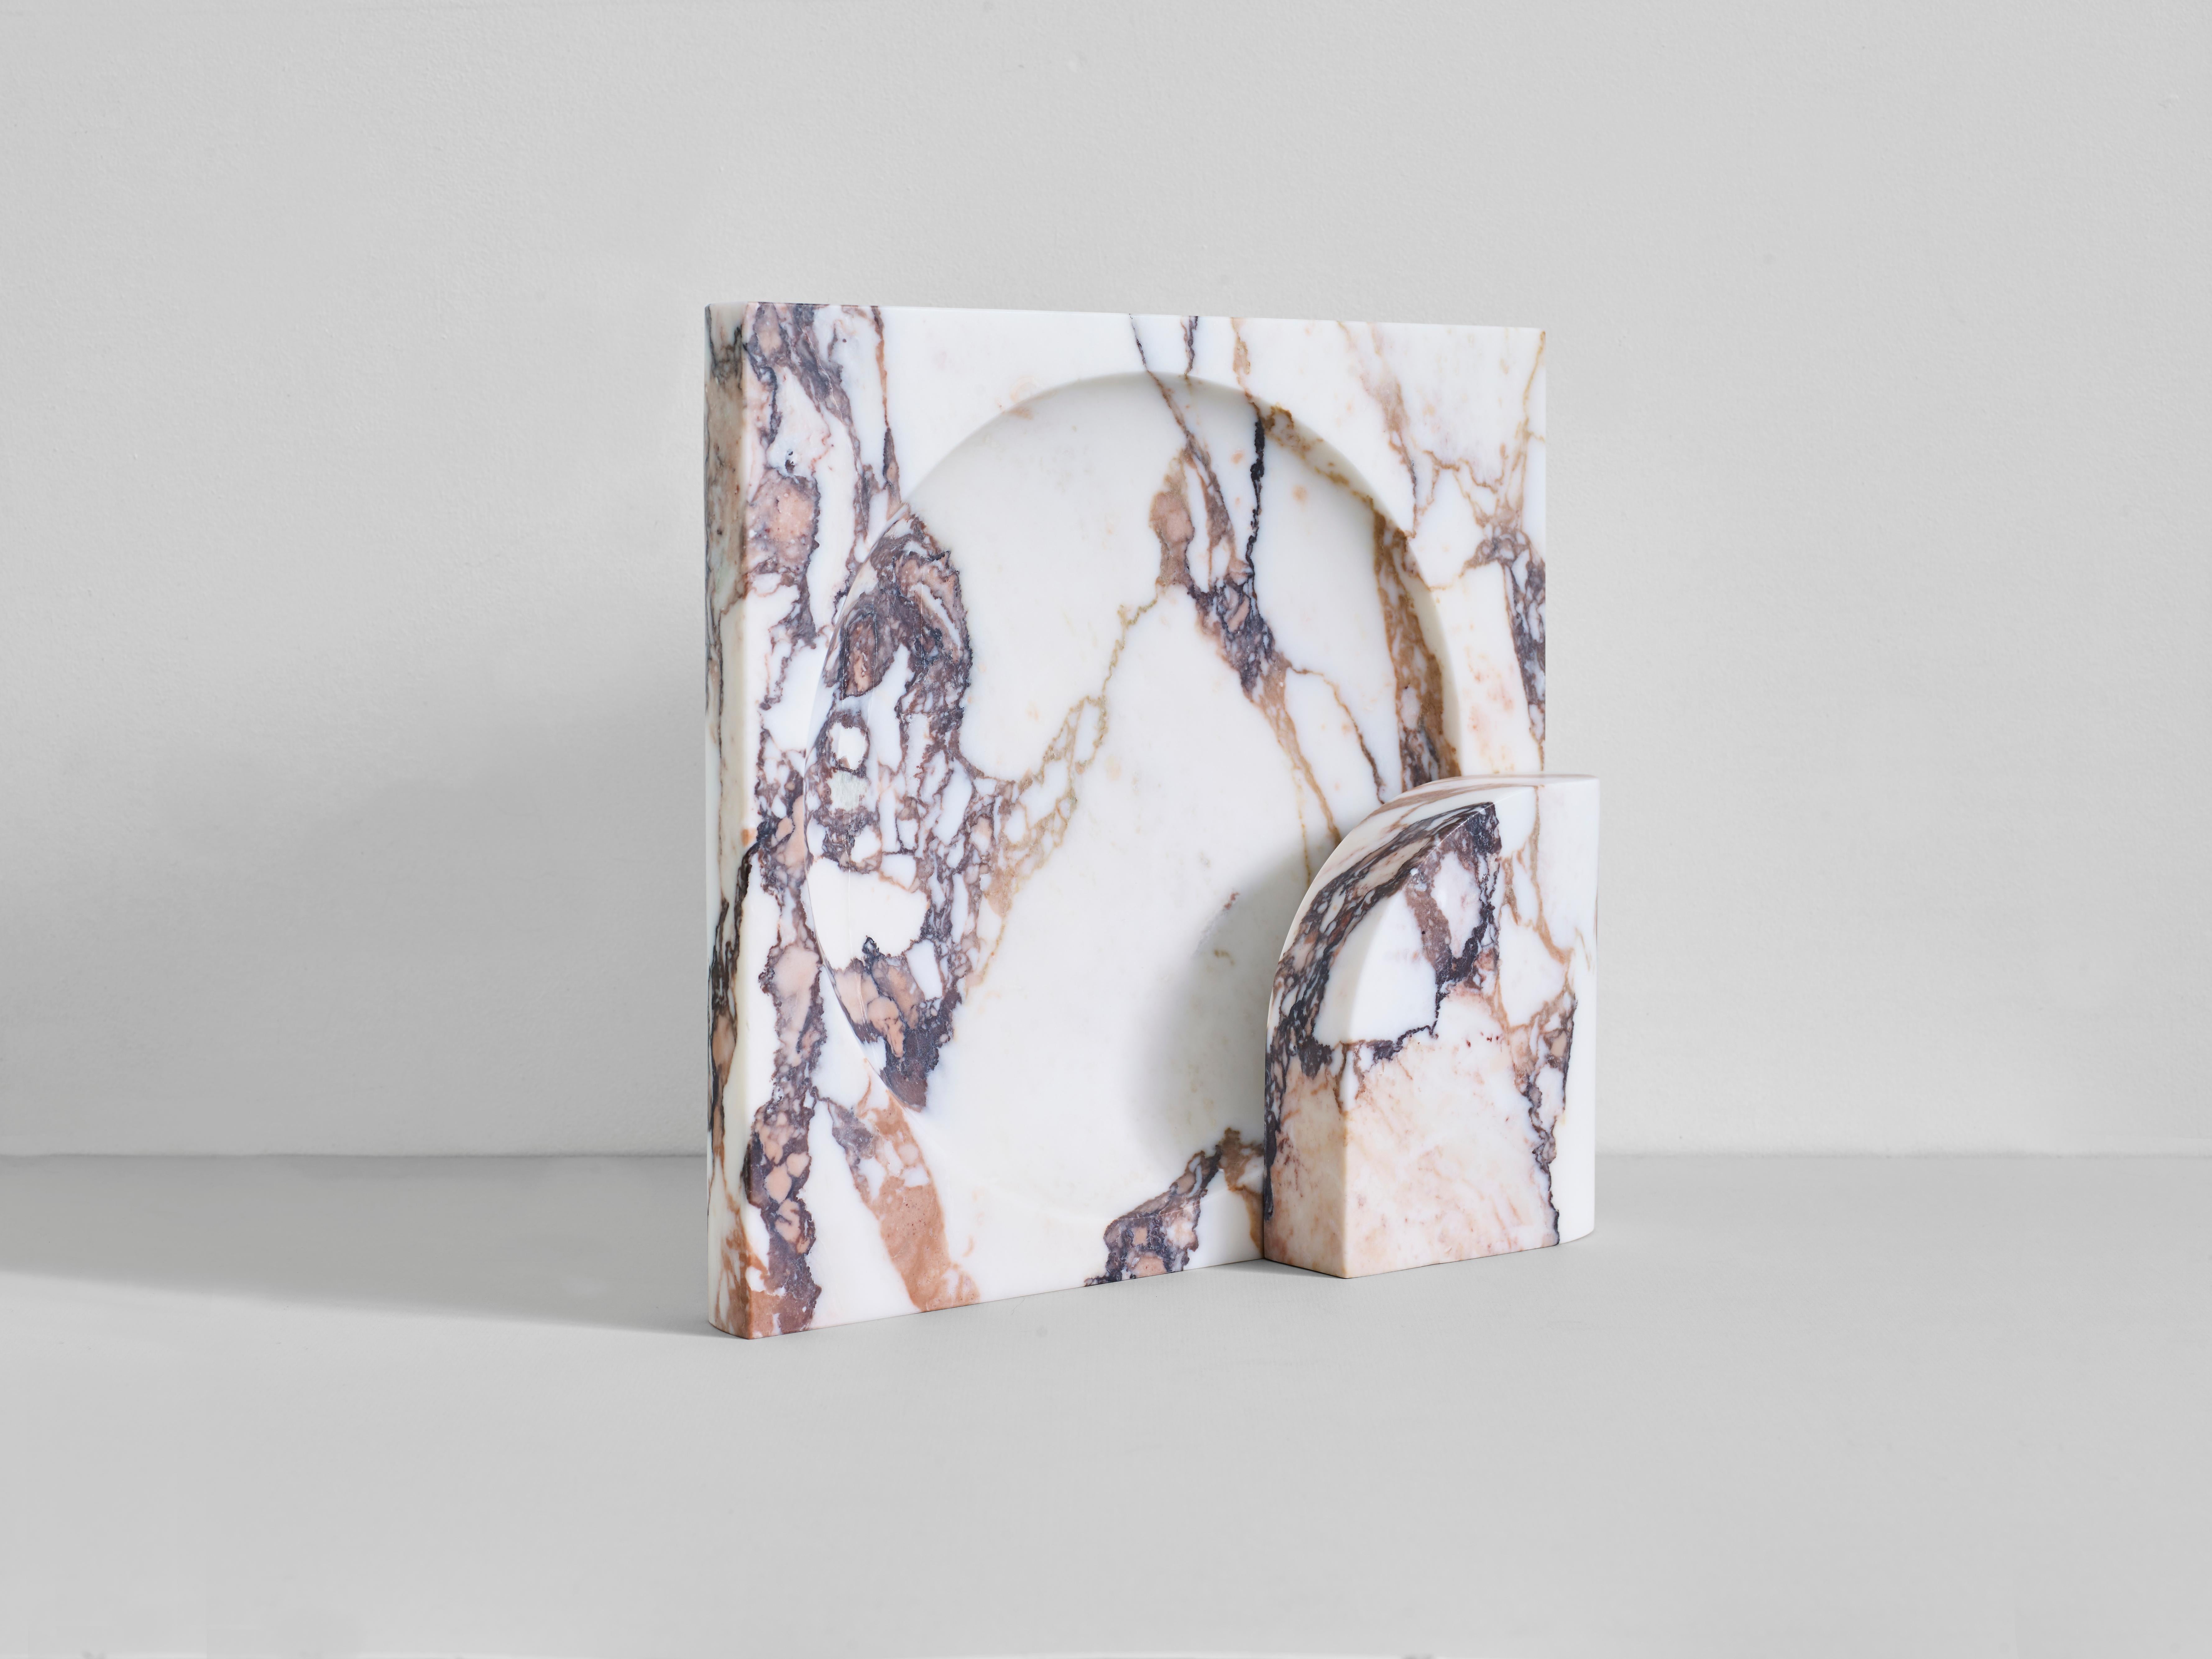 Calacatta Viola Block Sconce by Henry Wilson
Dimensions: W 35 x D 11 x H 35 cm
Materials: Calacatta Viola marble 
This sculptural item is handmade in Sydney, Australia.

The block sconce in Calacatta Viola marble is a two-piece stone light with